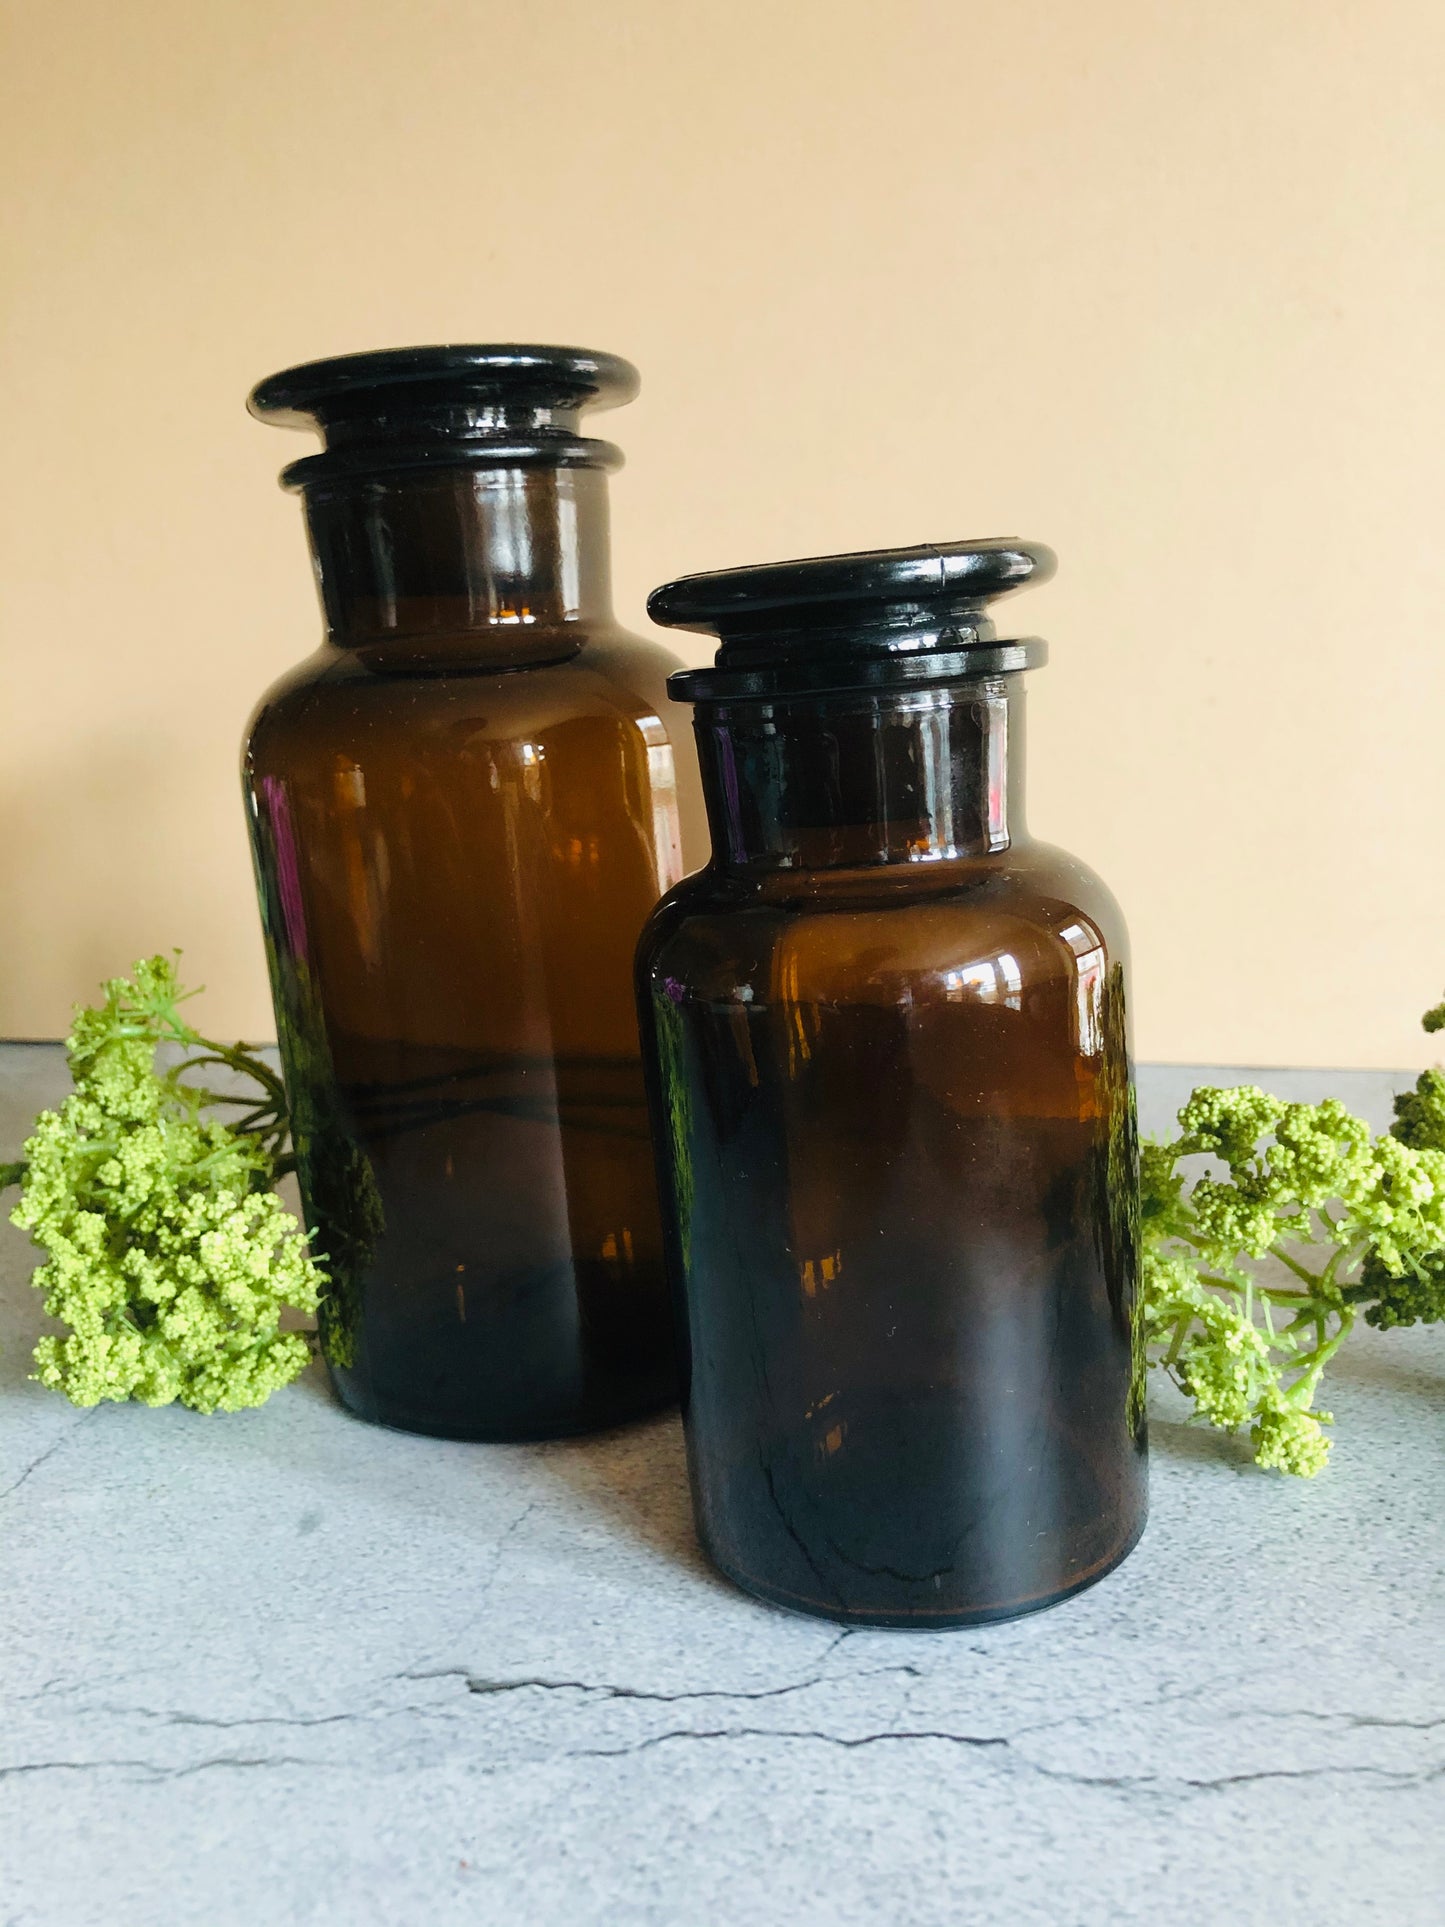 The Artist Nyle - Vintage Apothecary Bottles